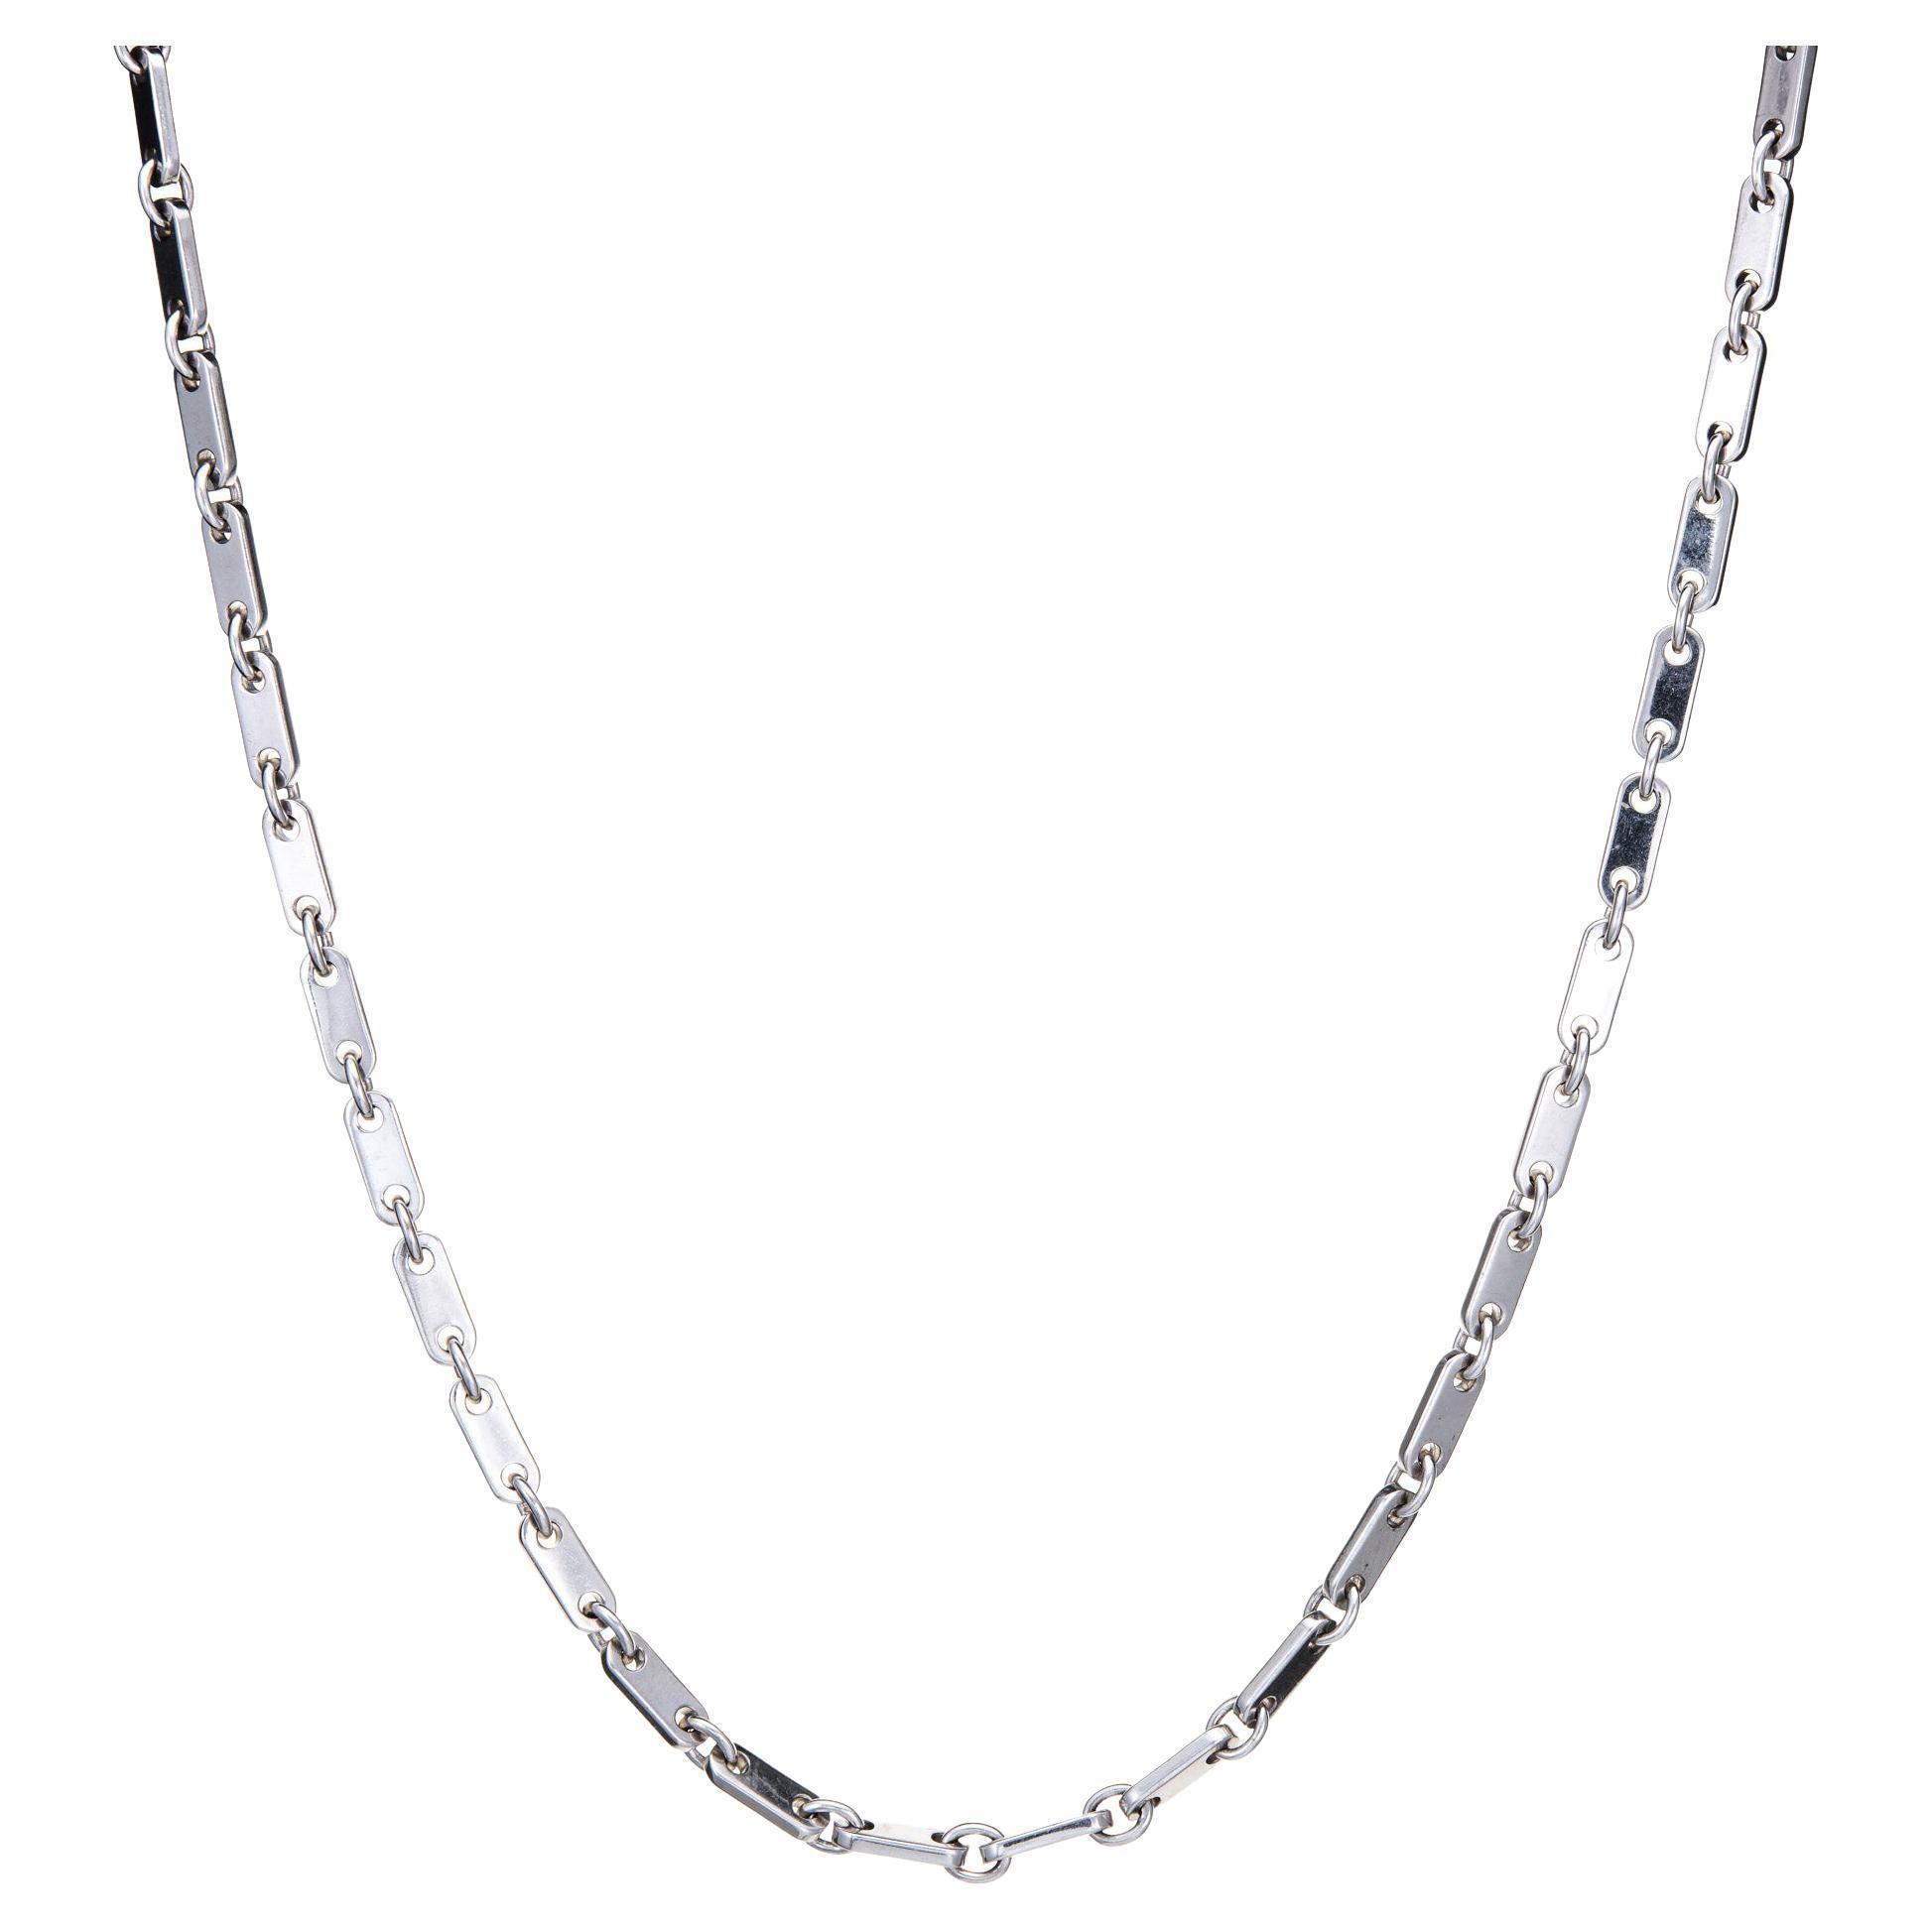 Cartier Flat Link Necklace 18k White Gold Chain Estate Signed Jewelry For Sale